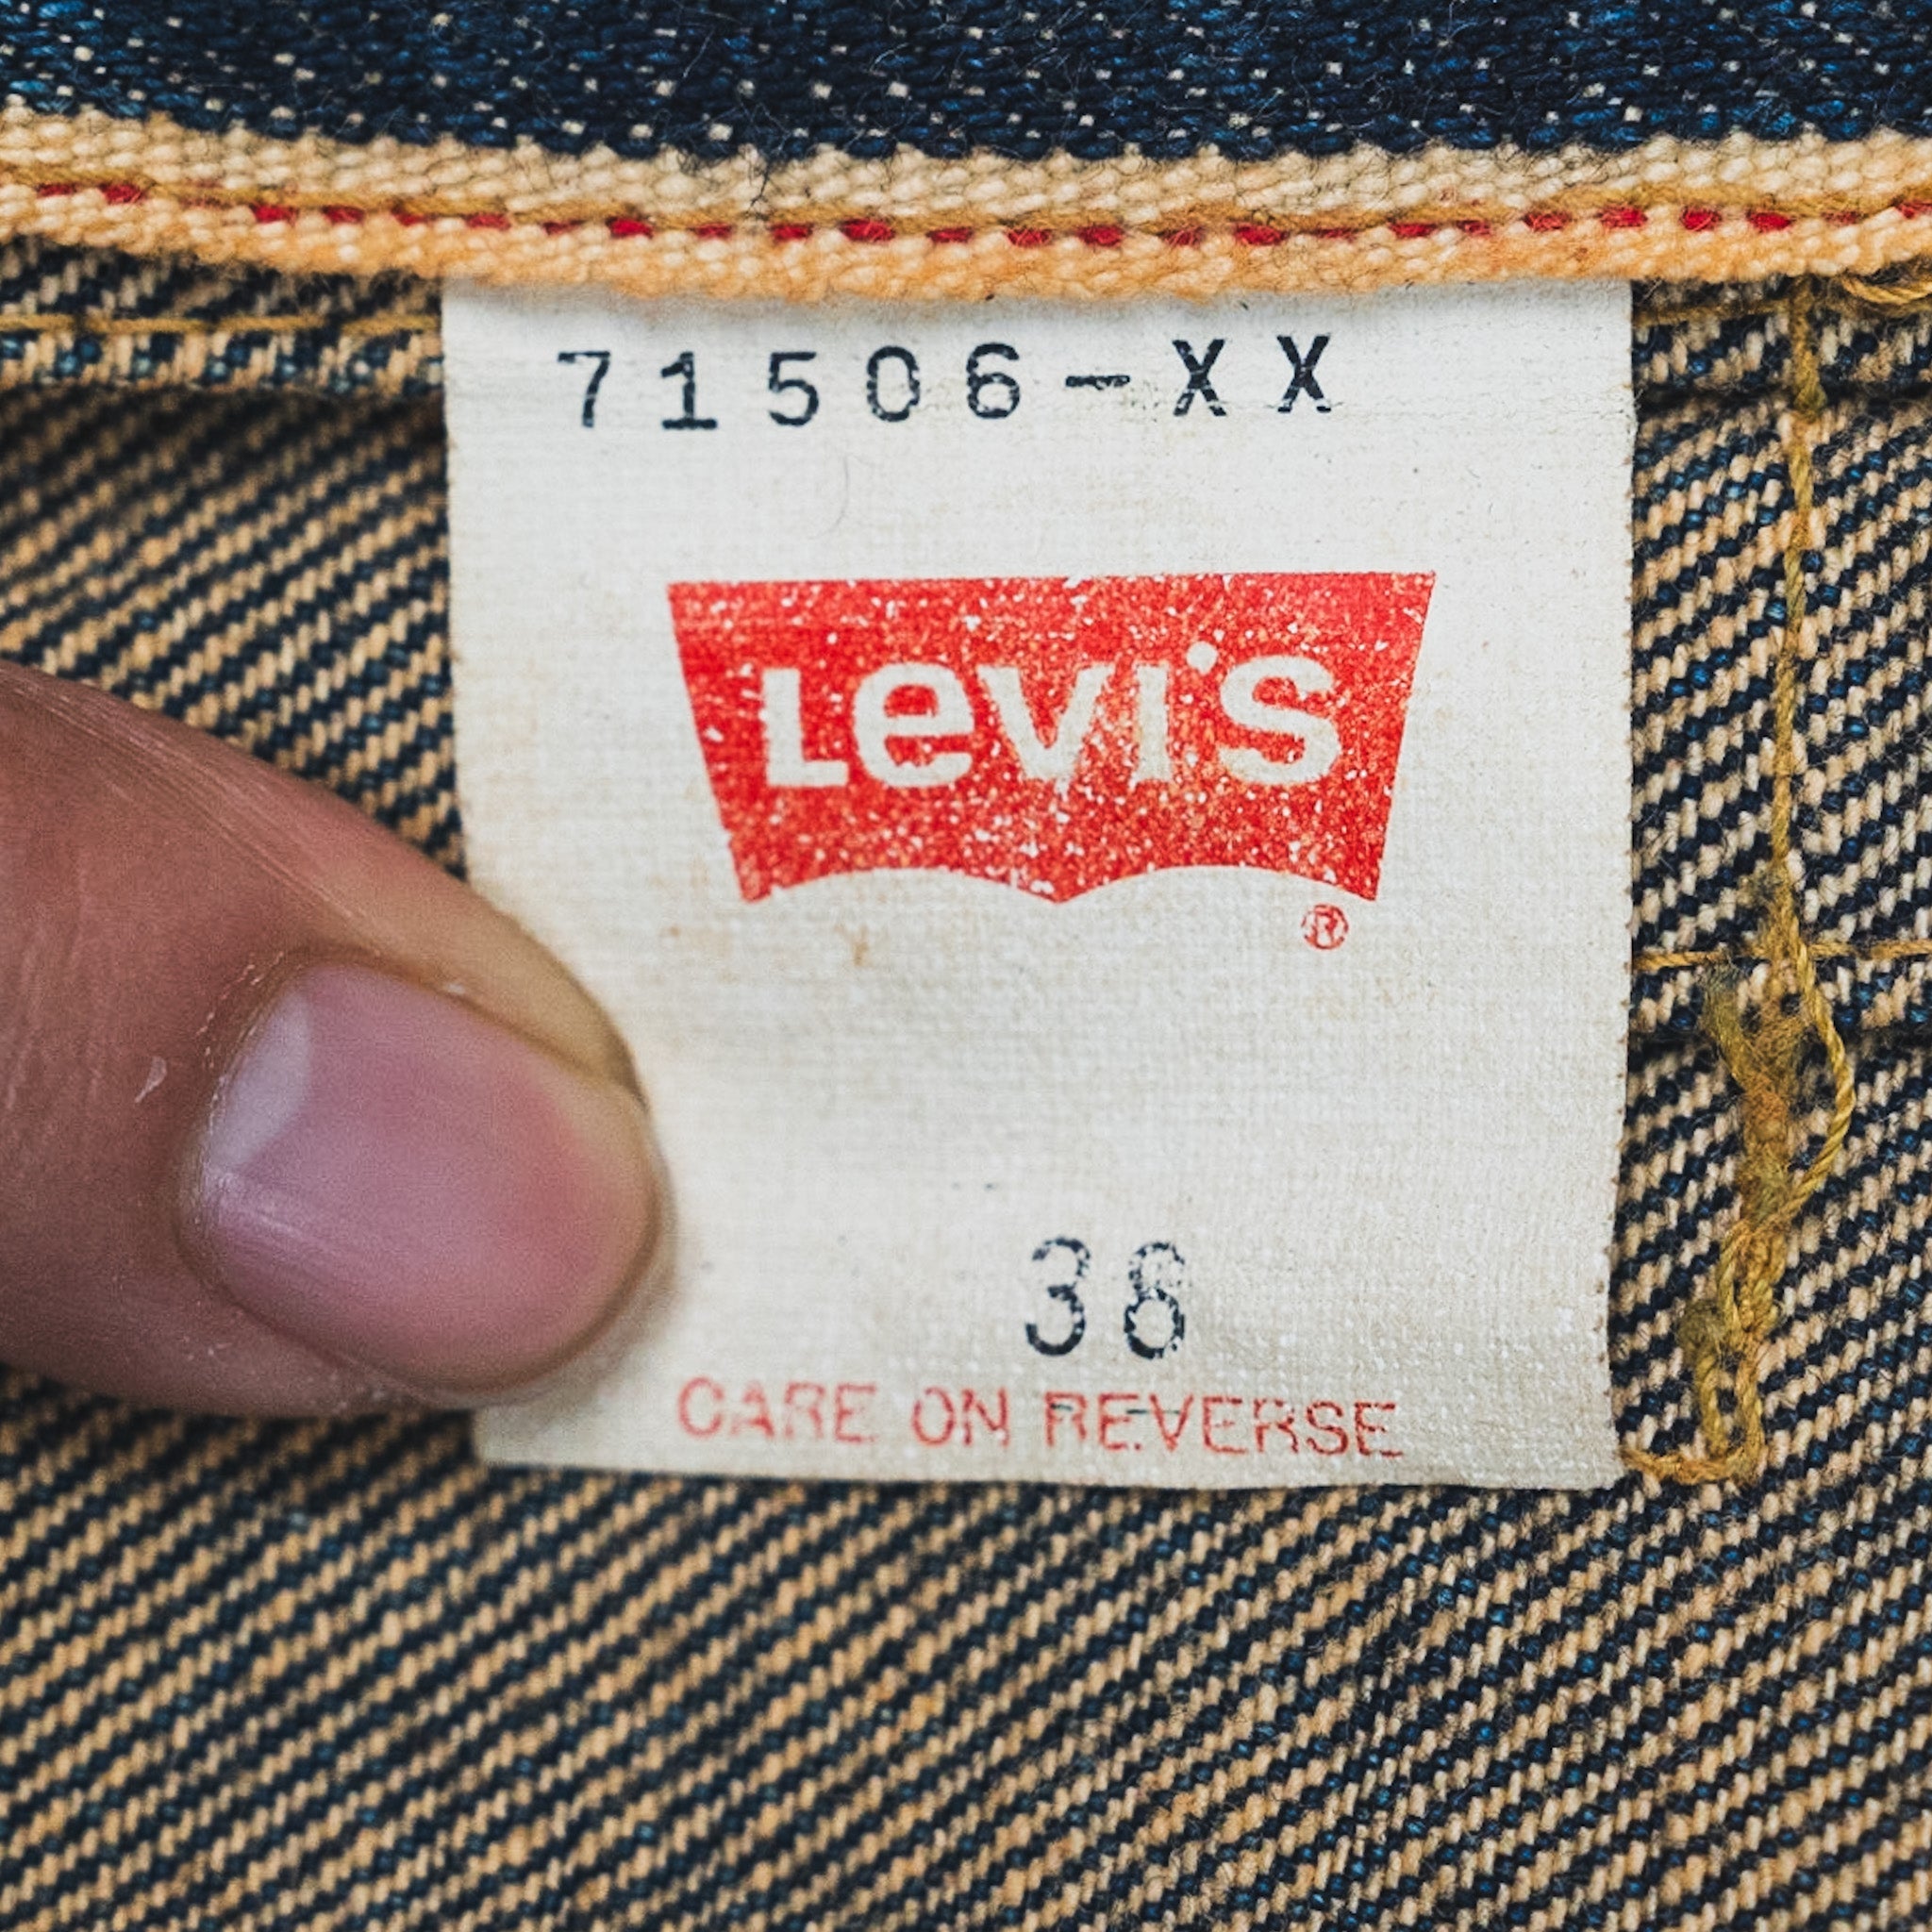 Levi's Japan 71506 Type 1 Big E Jacket 38 – The Grand Mcqueen